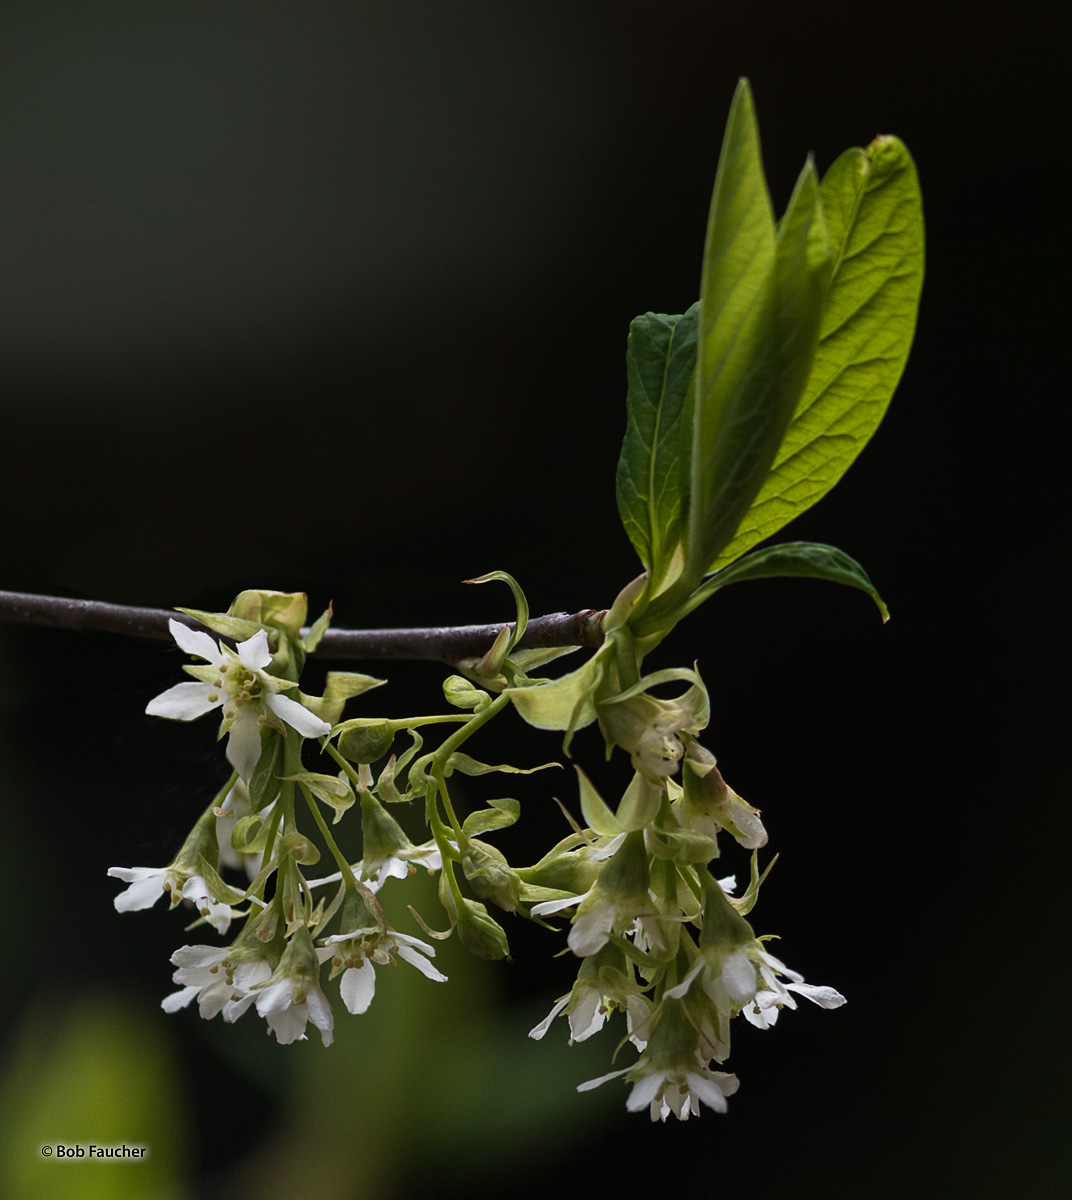 Oemleria cerasiformis, a shrub commonly known as osoberry or Indian plum, is the sole species in genus Oemleria. Native to the...